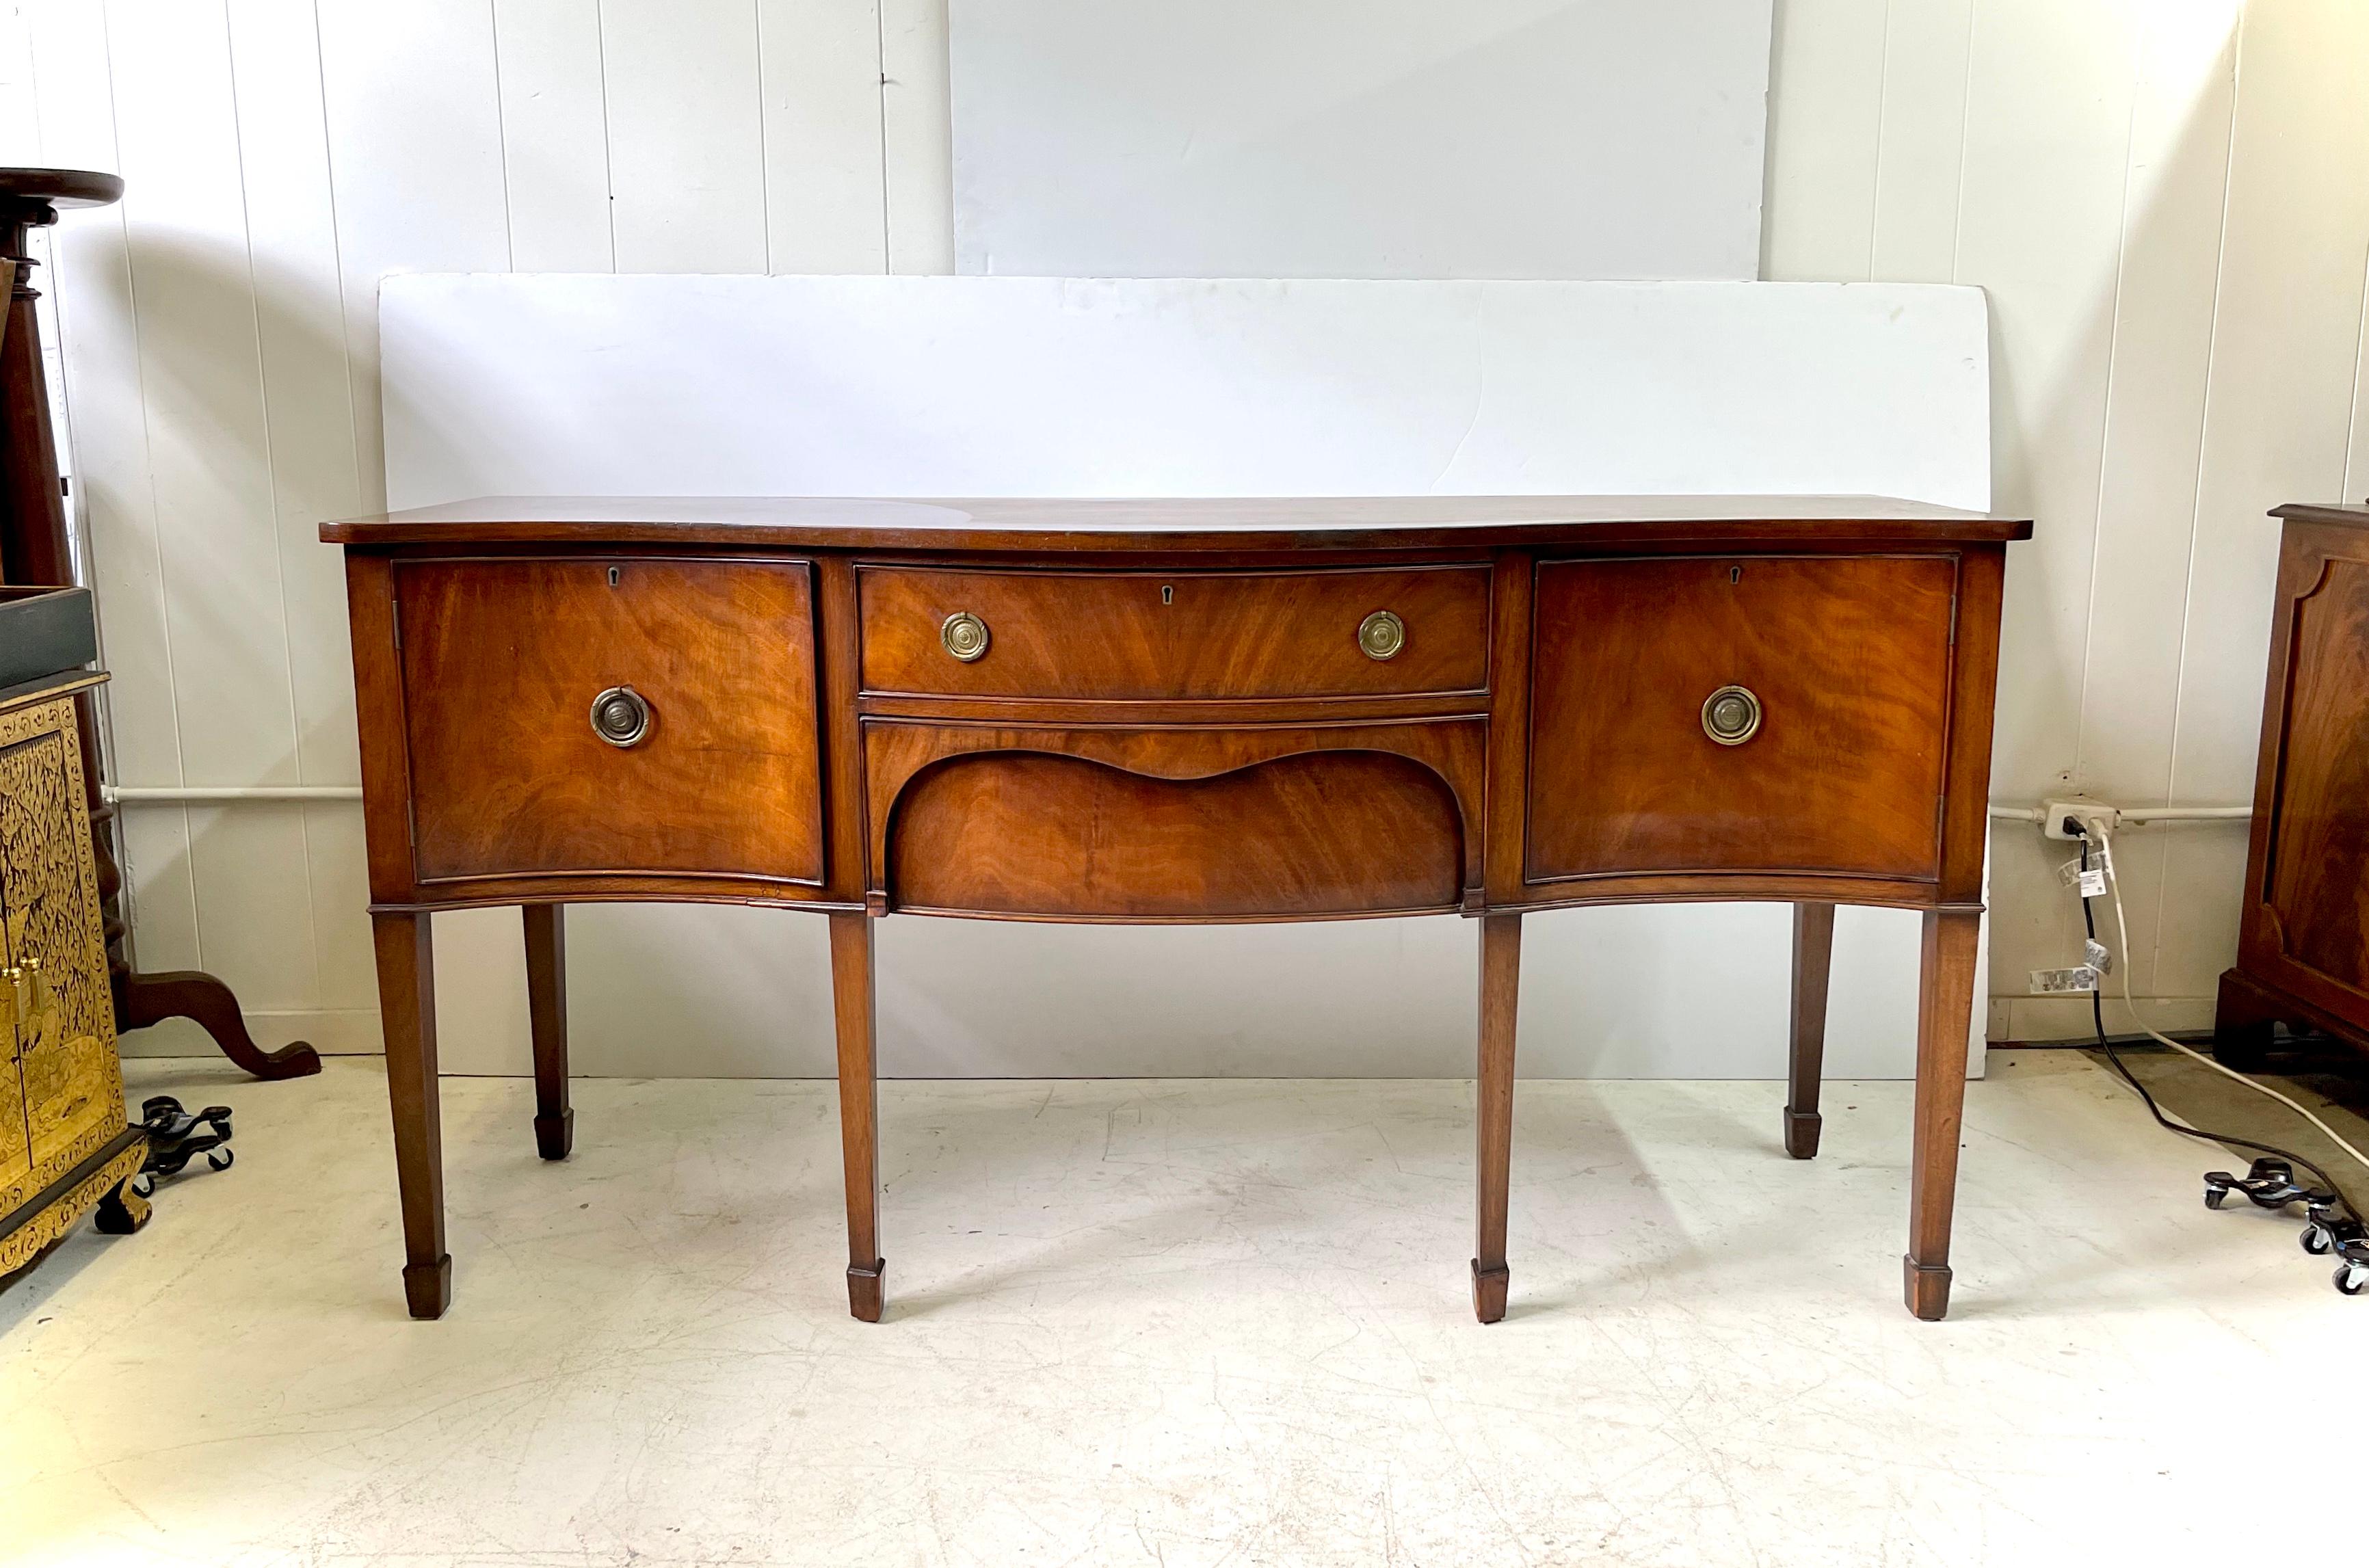 19th century English sideboard, serpentine in shape and constructed of flame mahogany, made in the manner of George III. A shaped one board top rests on a case with beaded cabinets flanking a fitted felt-lined silver drawer over a recessed hidden